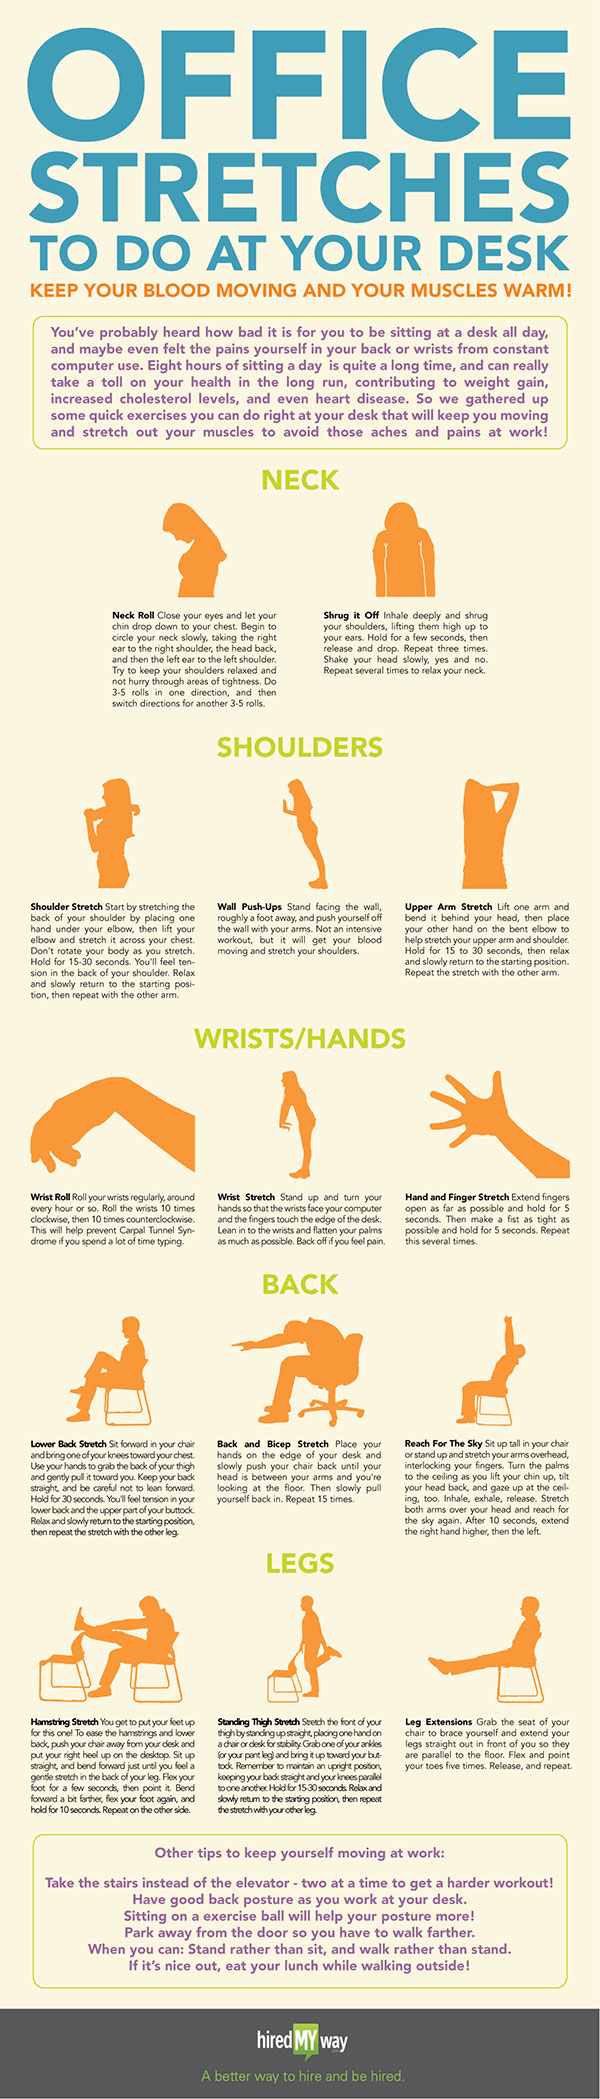 office-stretches-infographic